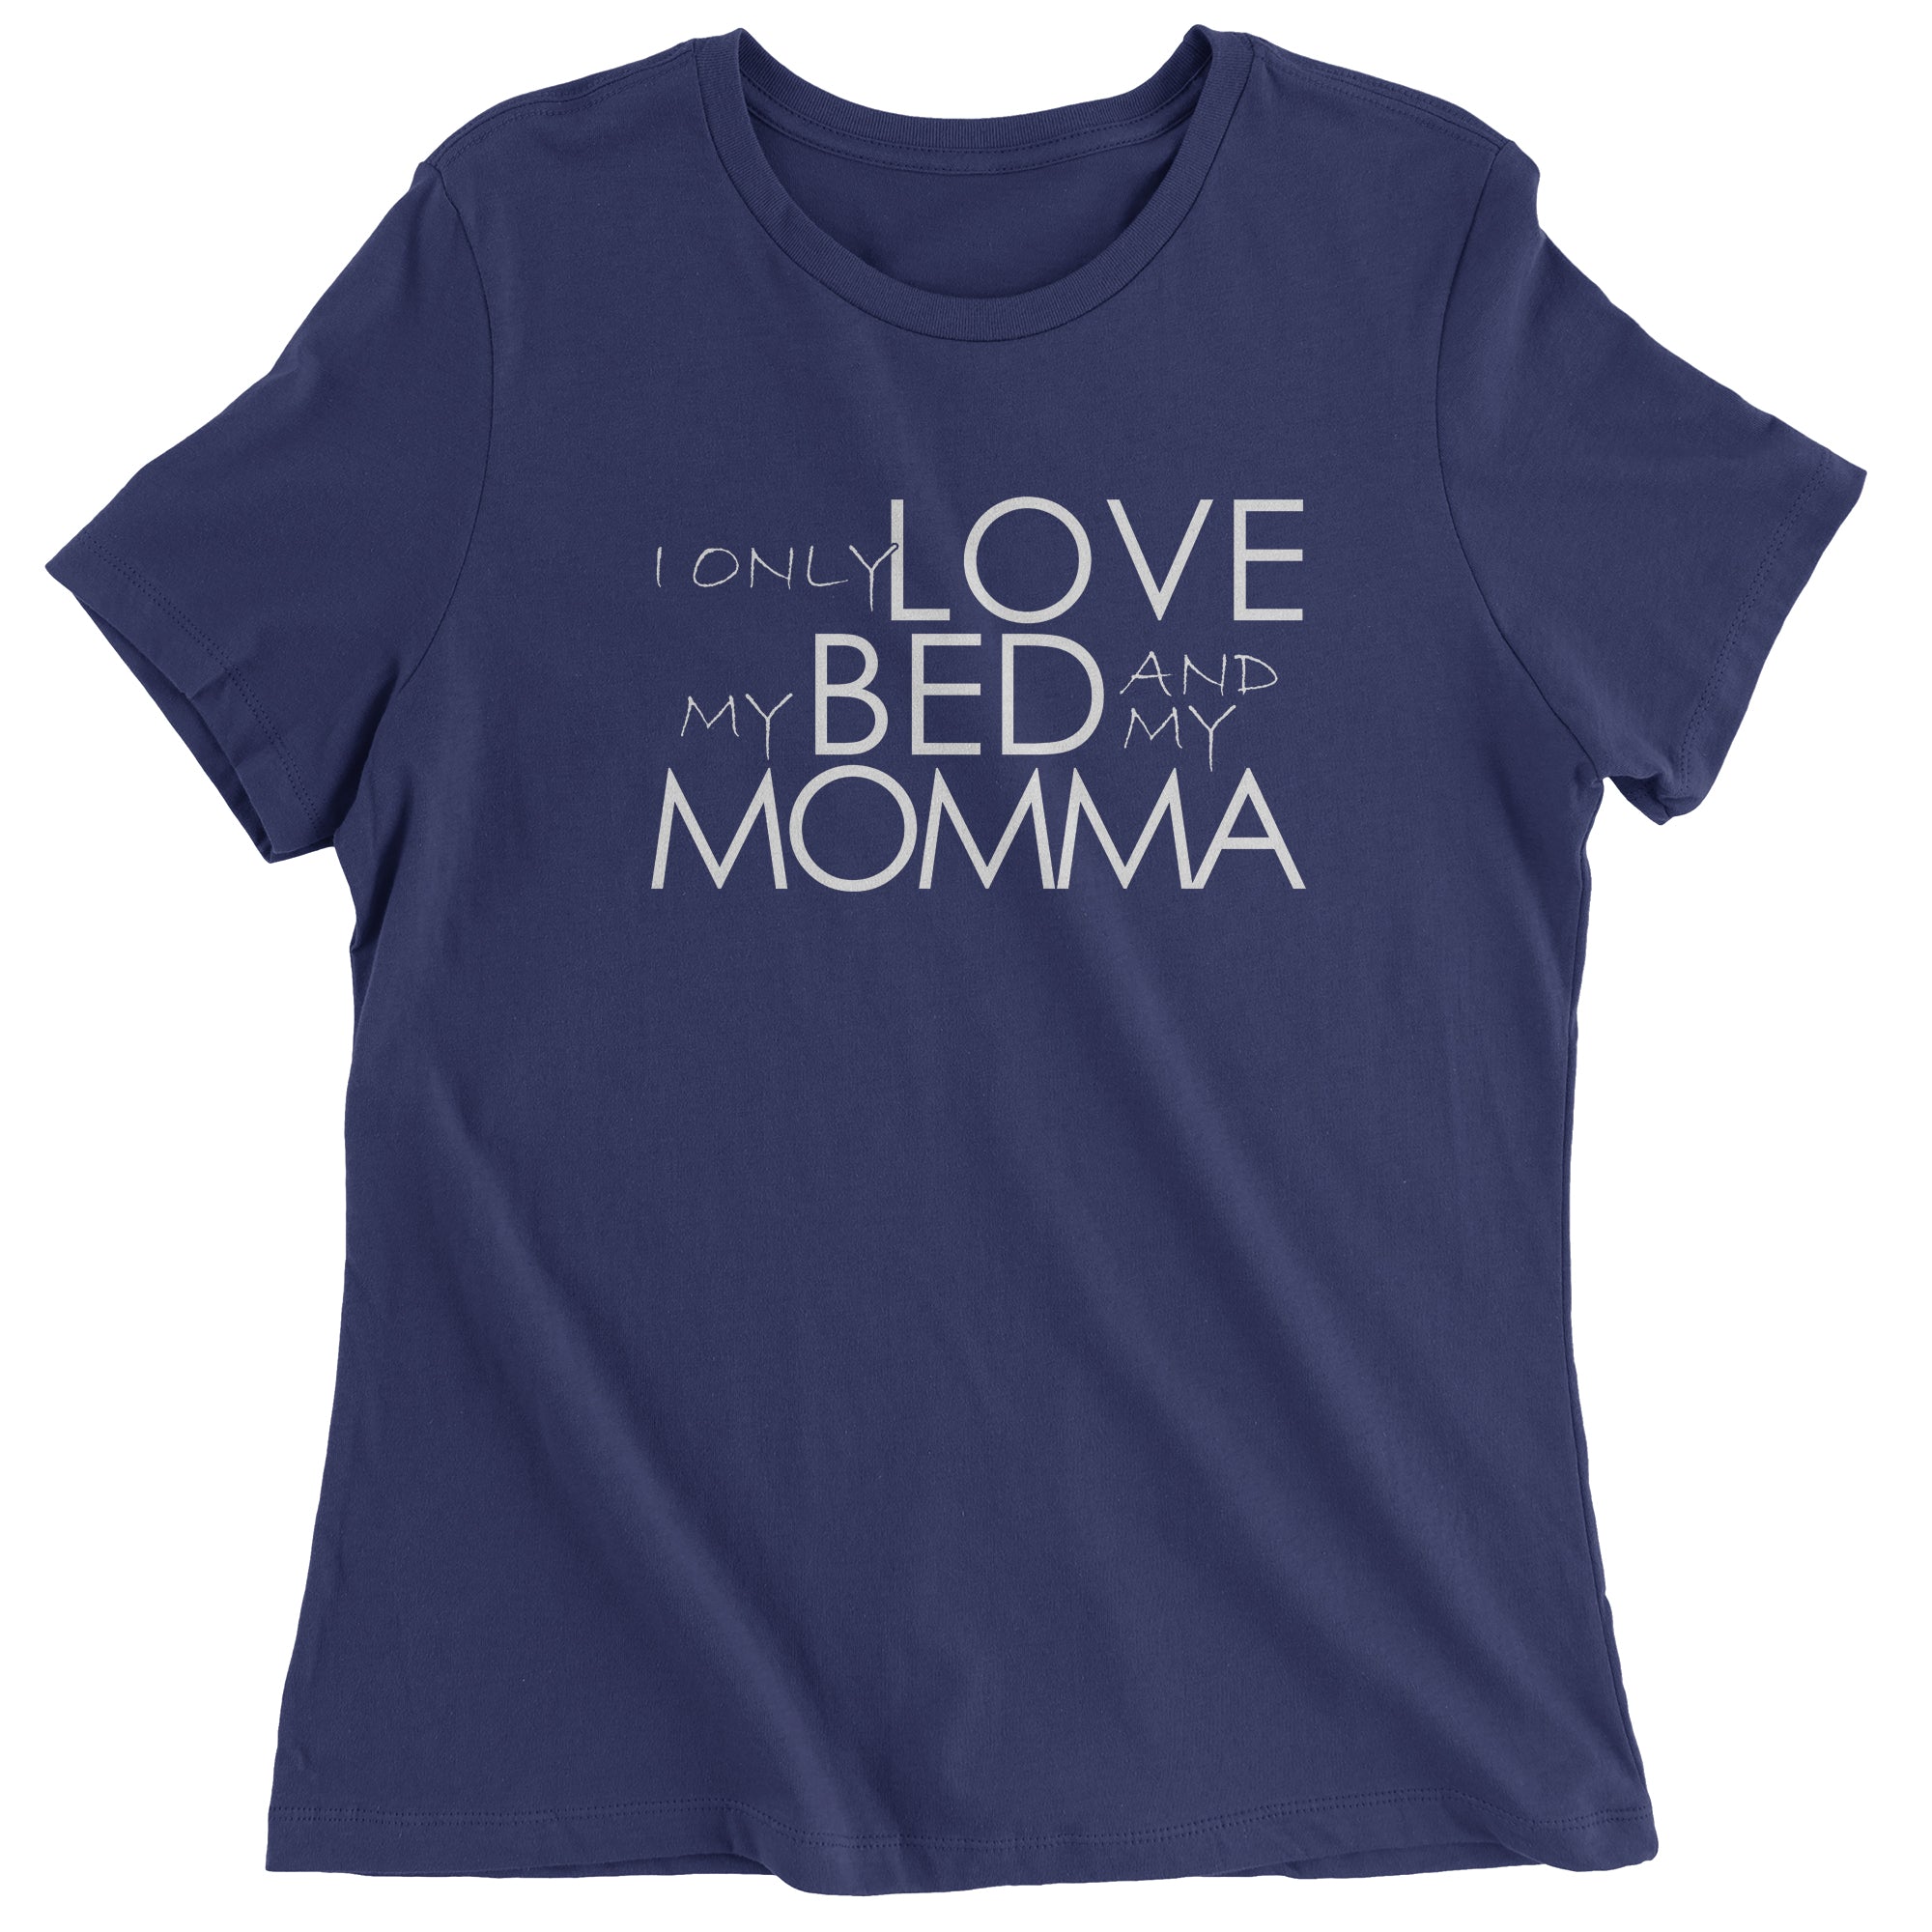 I Only Love My Bed And My Momma Women's T-Shirt